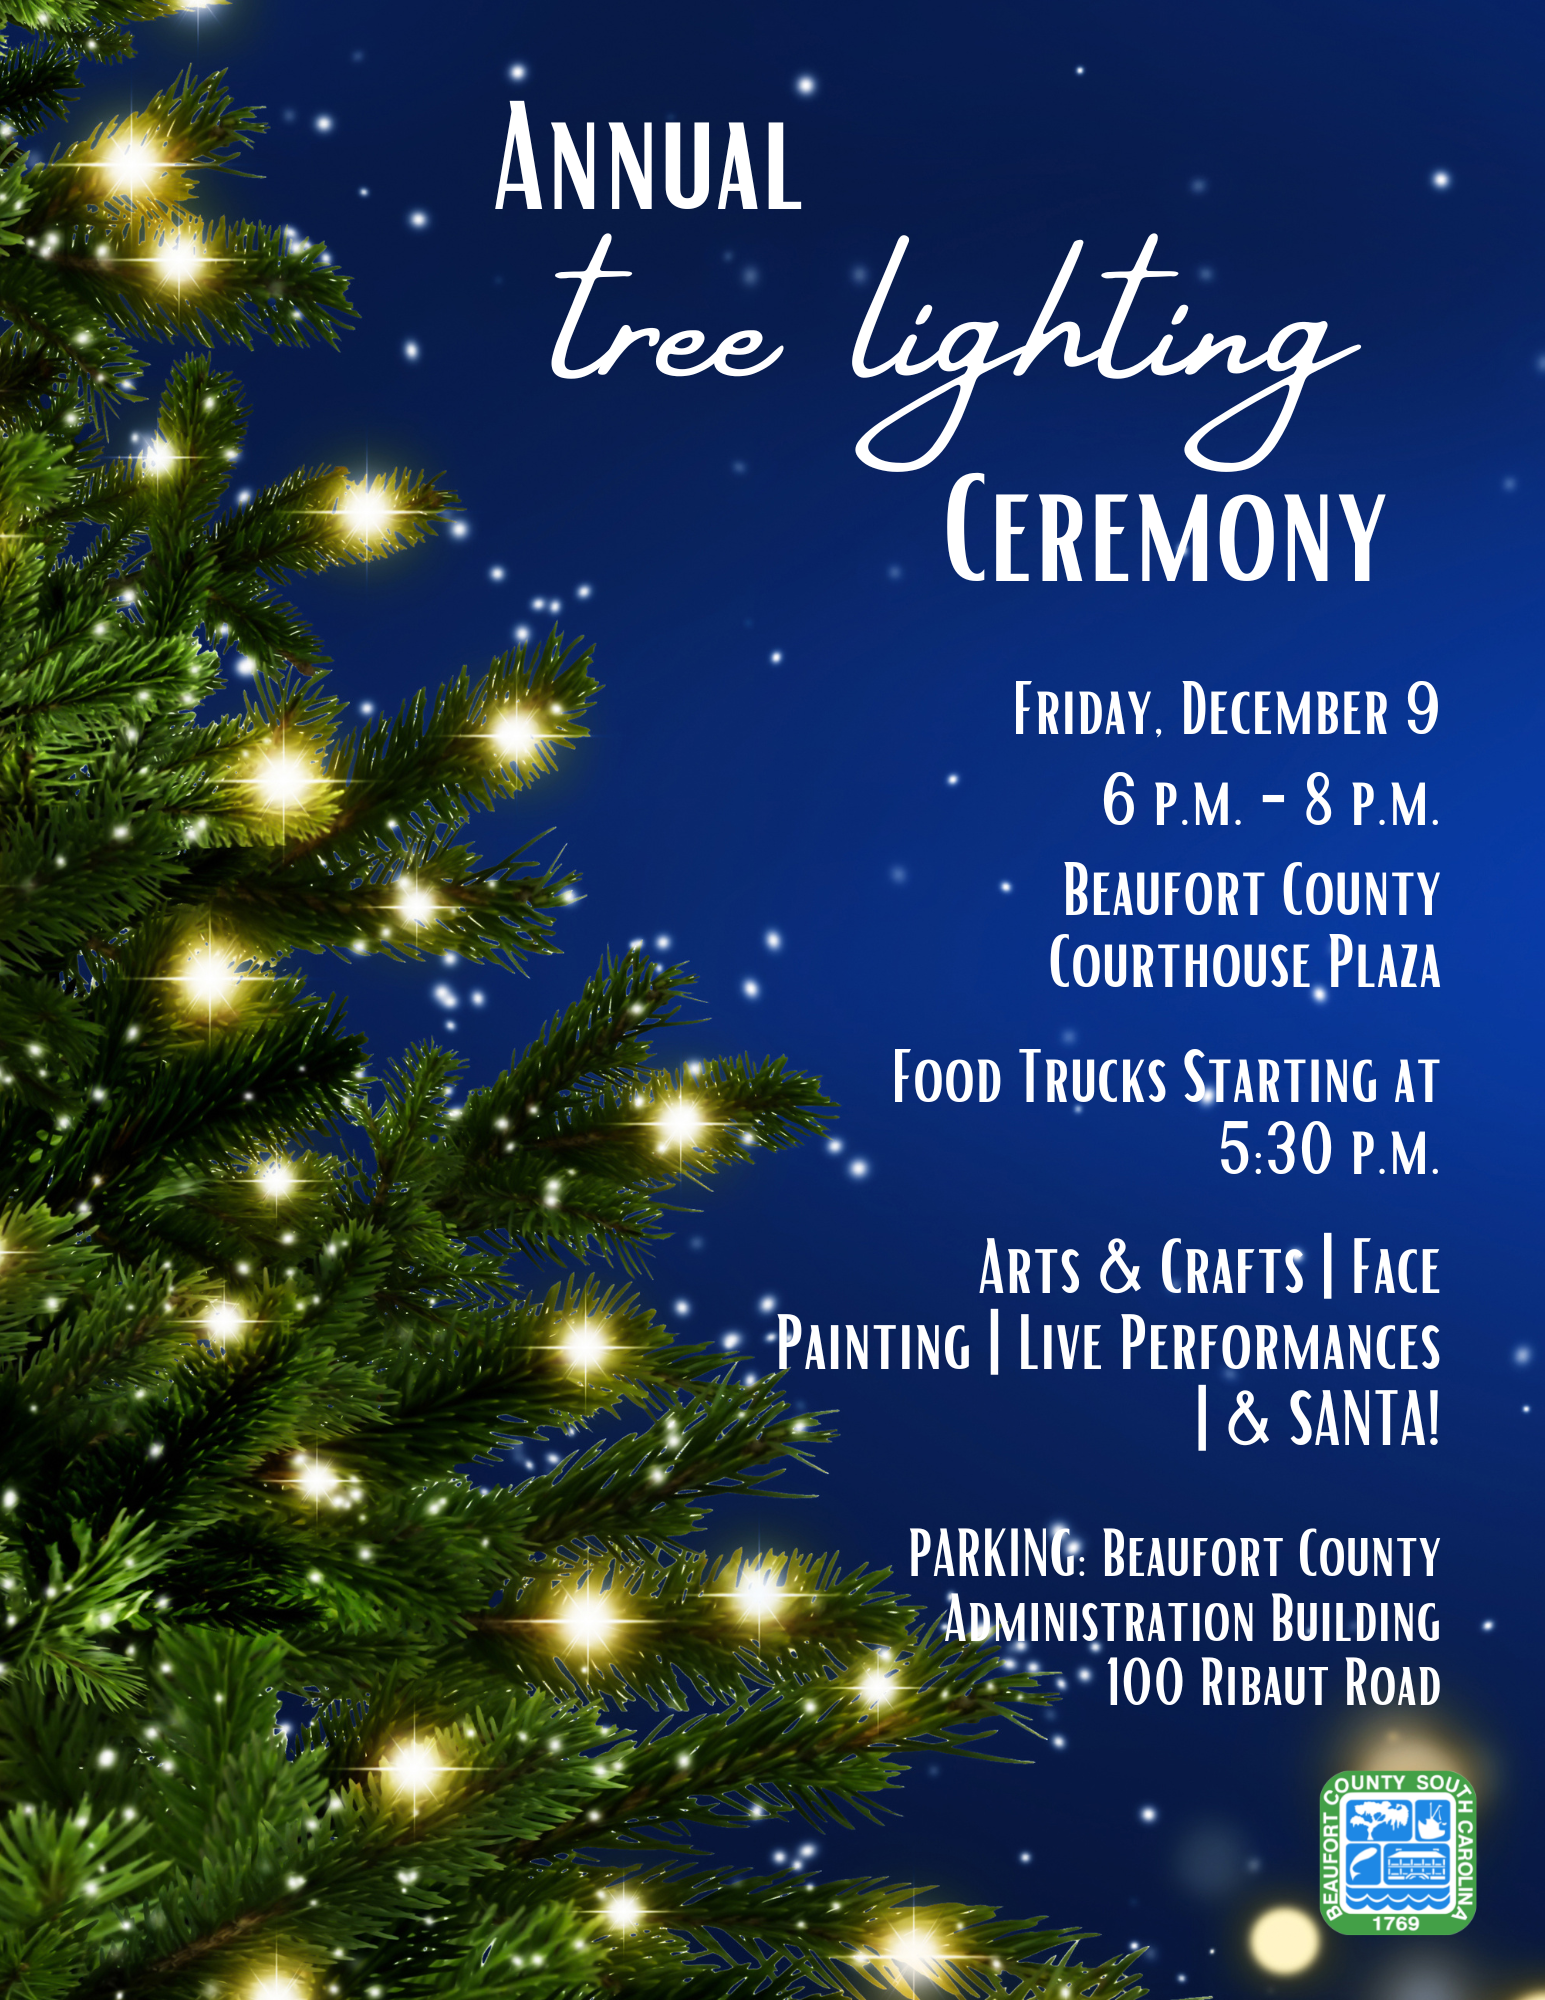 County Council and Community Christmas Tree Lighting Friday, December 9